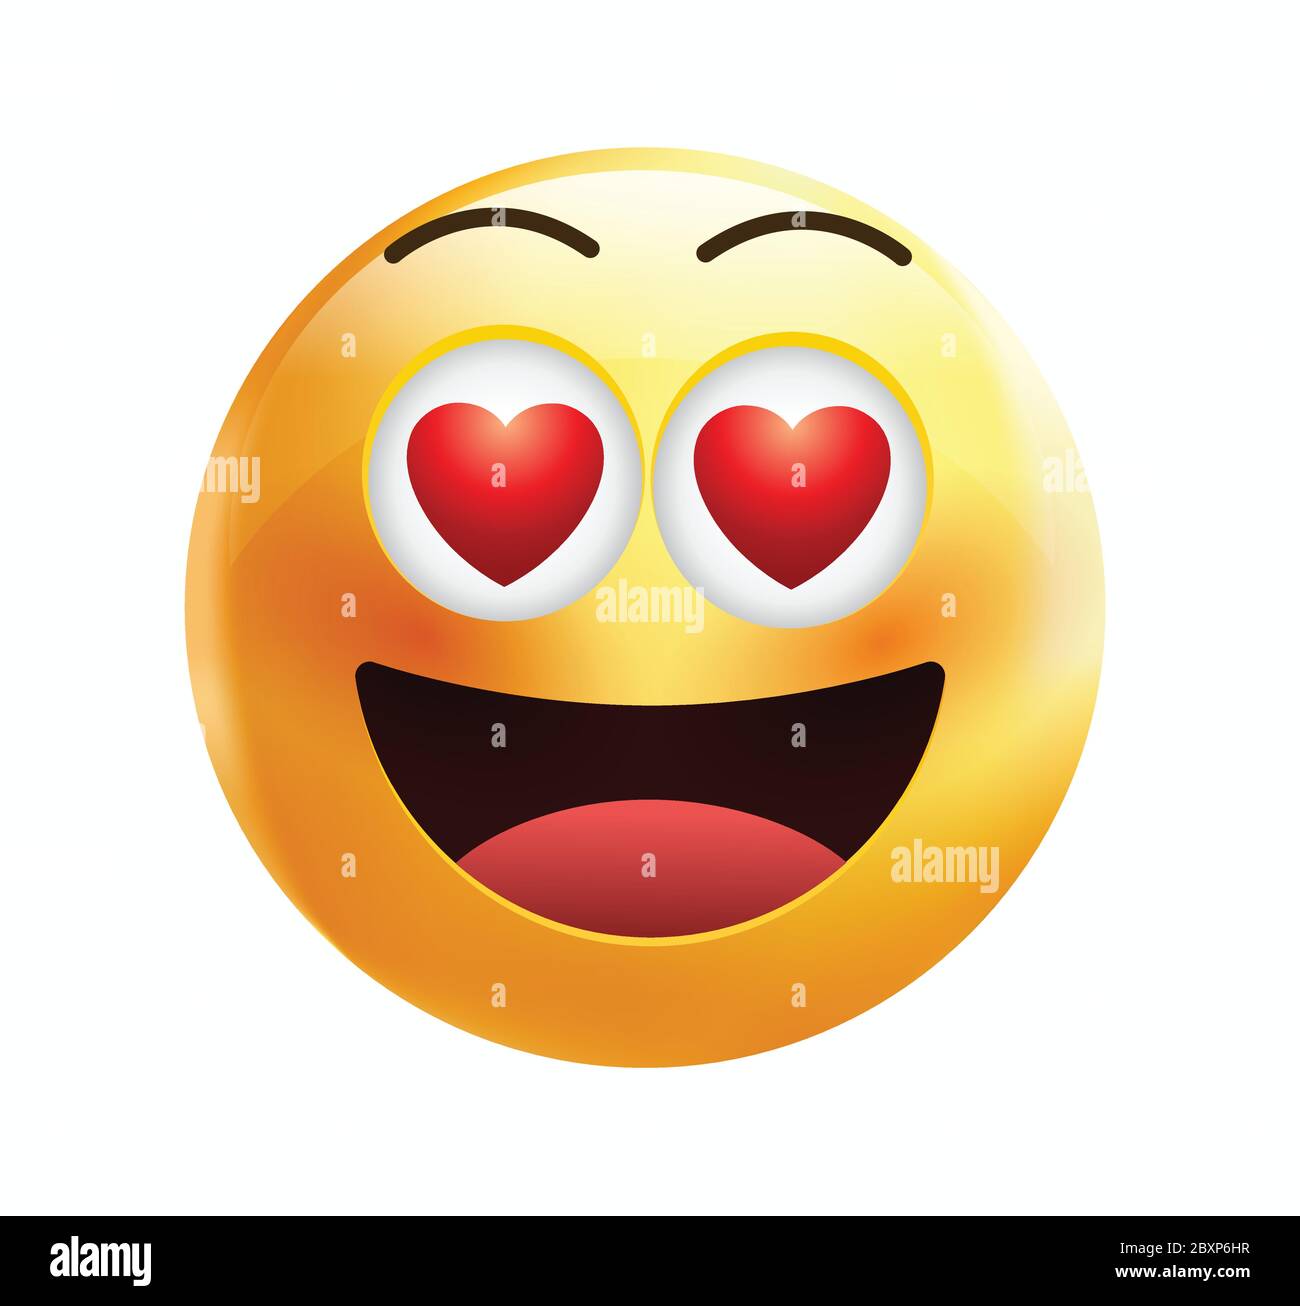 High quality emoticon smiling, love emoji isolated on white background. Yellow face emoji with red heart eyes and smile vector illustration. Stock Vector